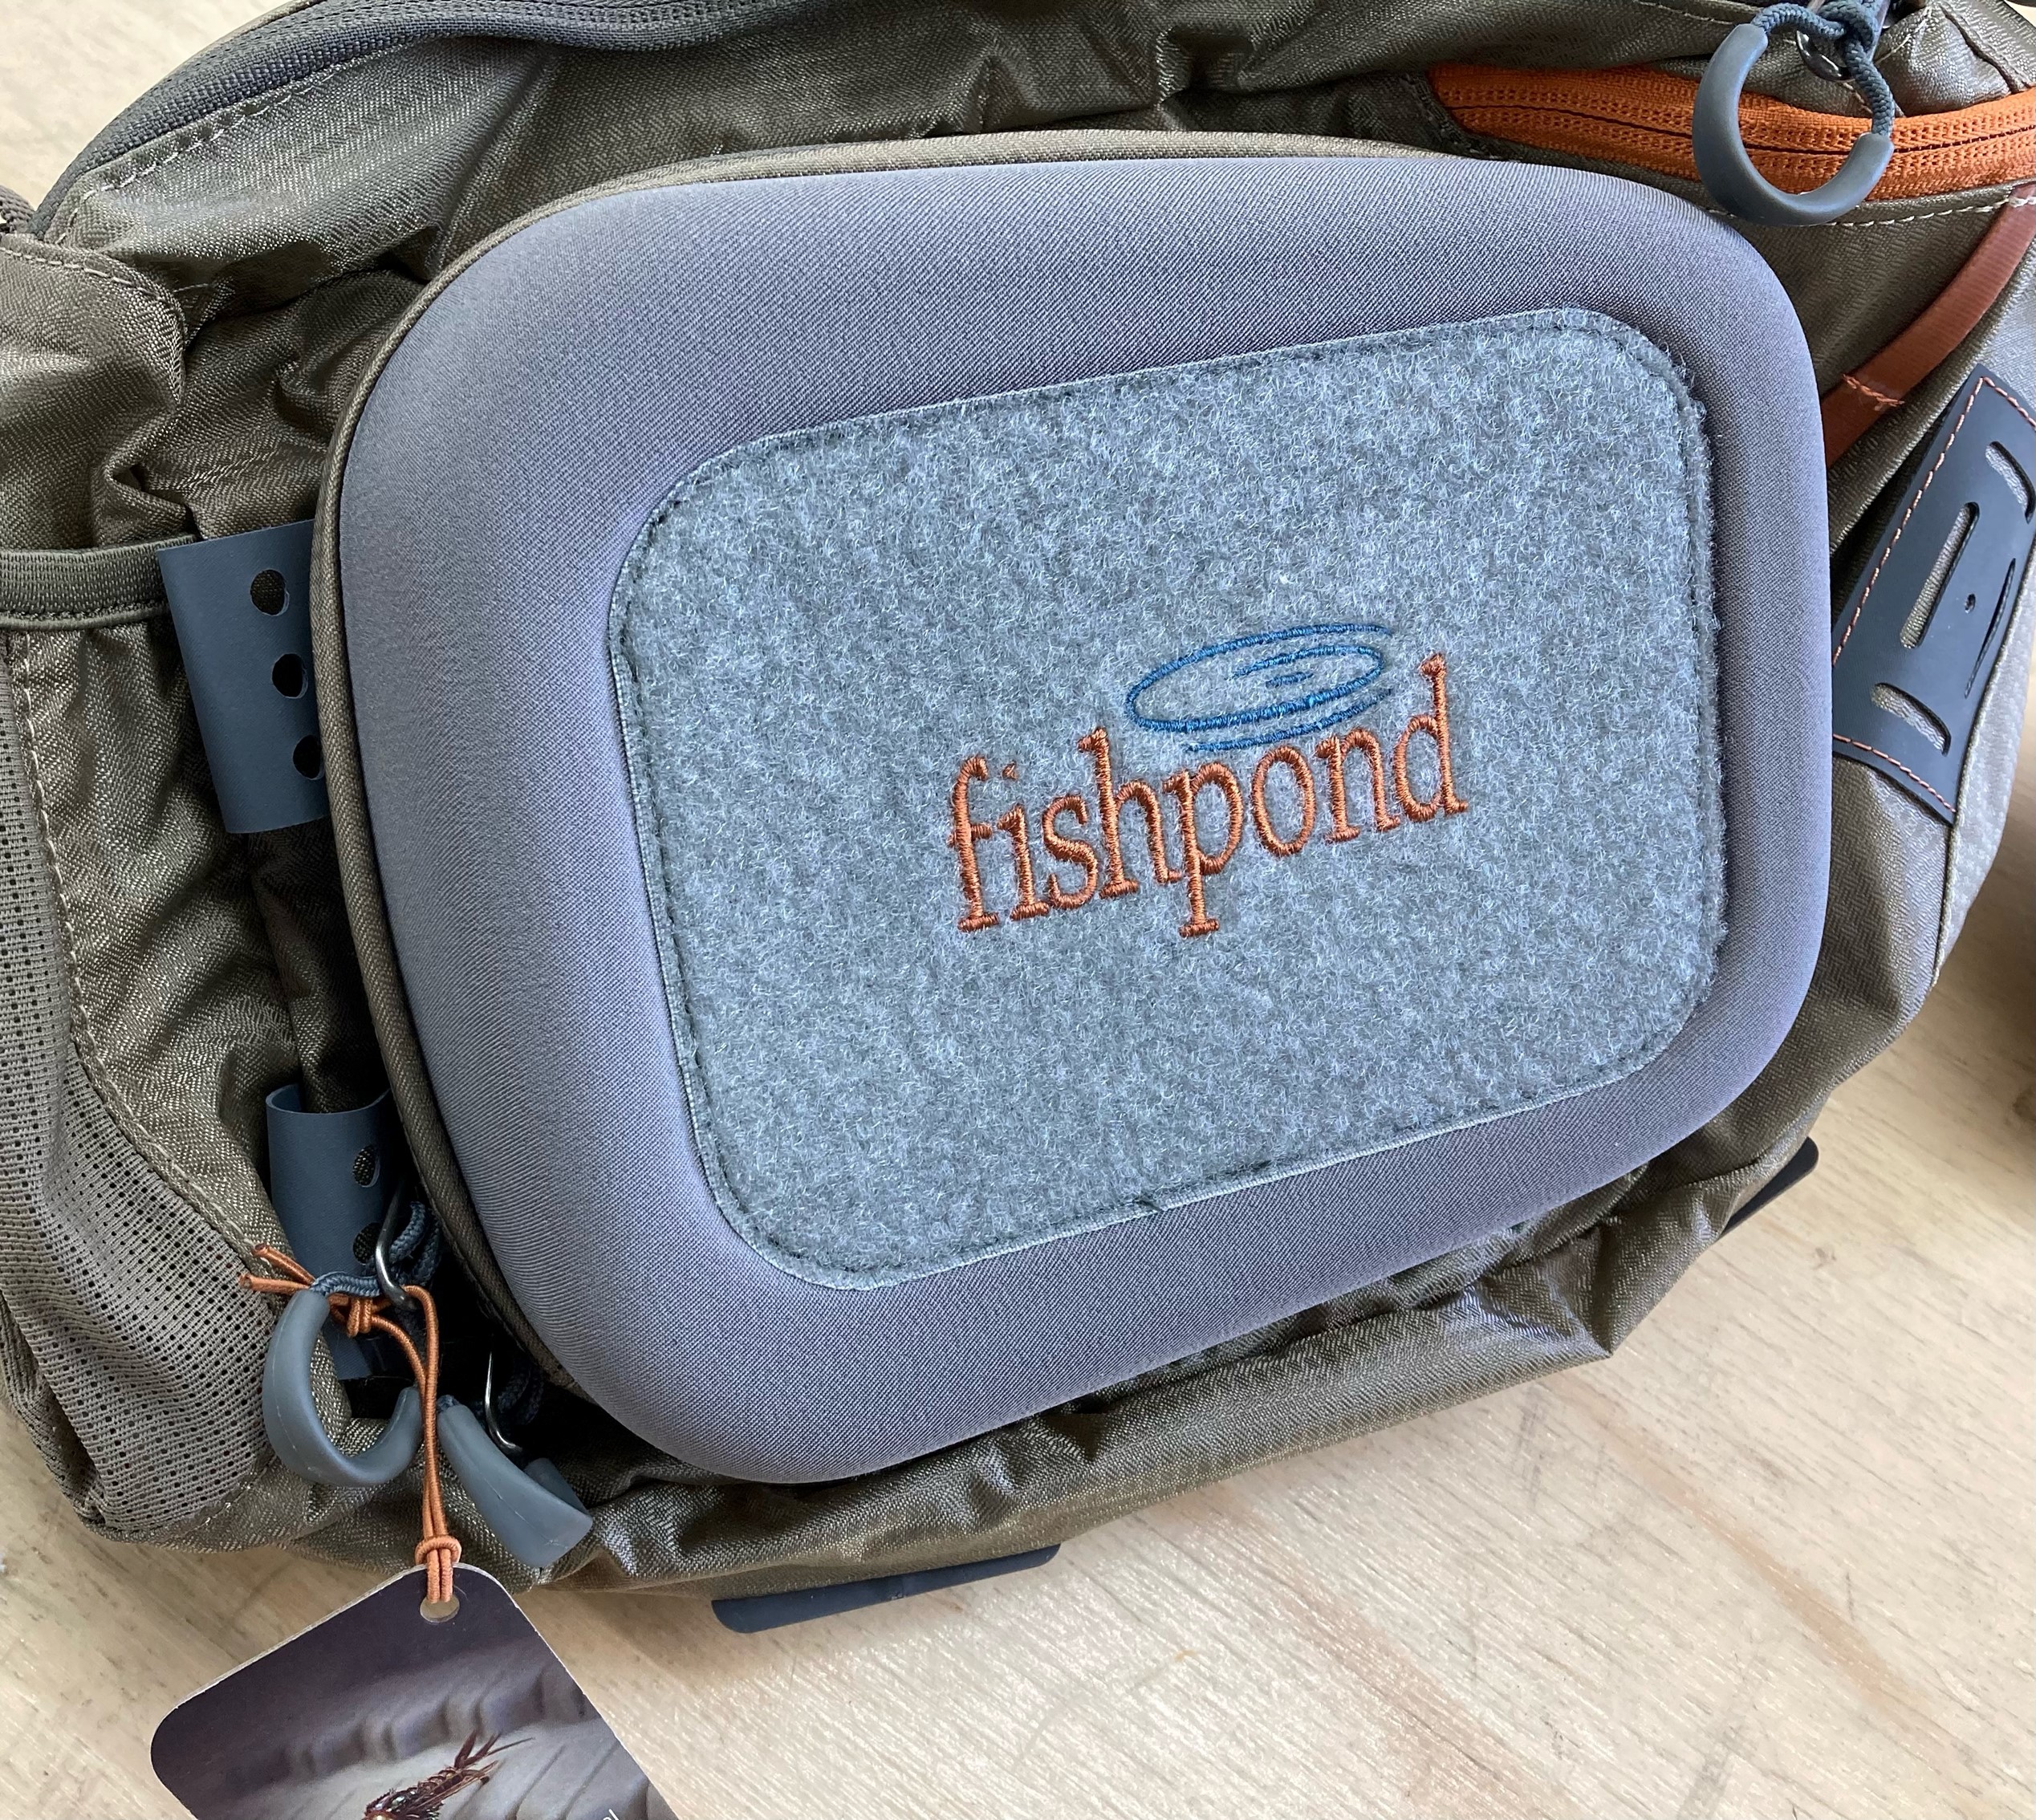 Fishpond Summit Sling 2.0 Review